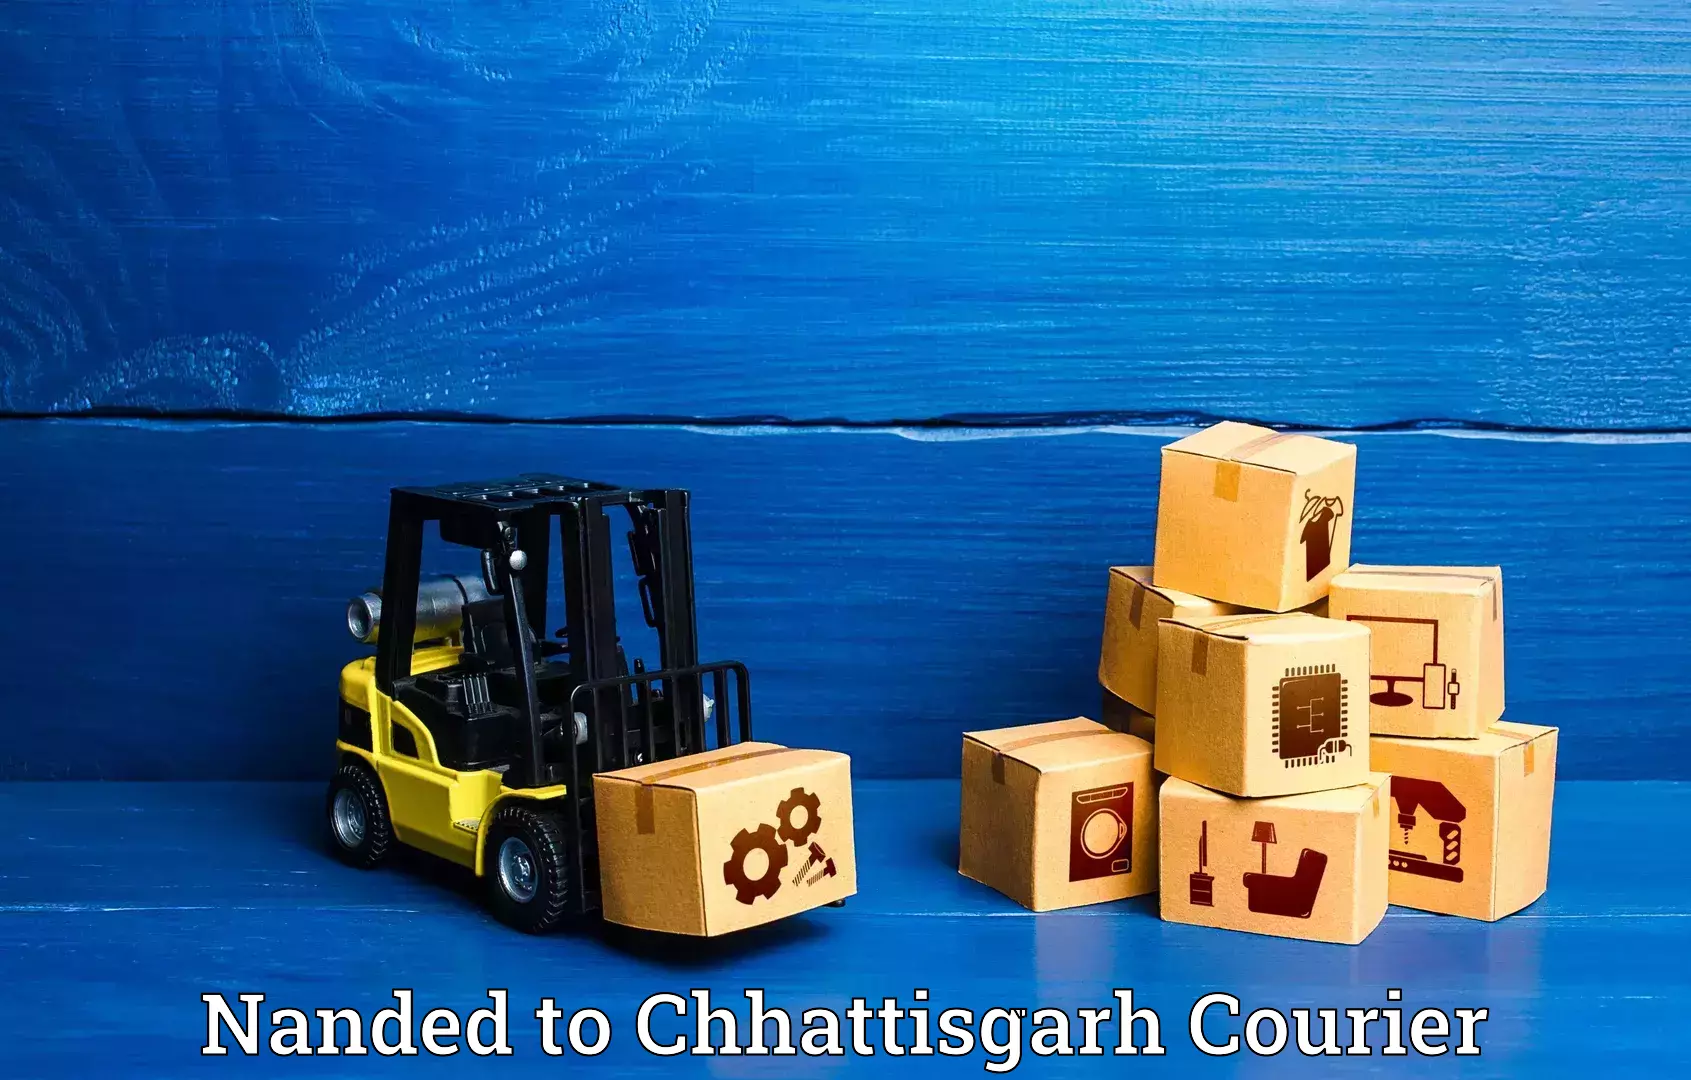 Luggage shipment specialists Nanded to Chhattisgarh